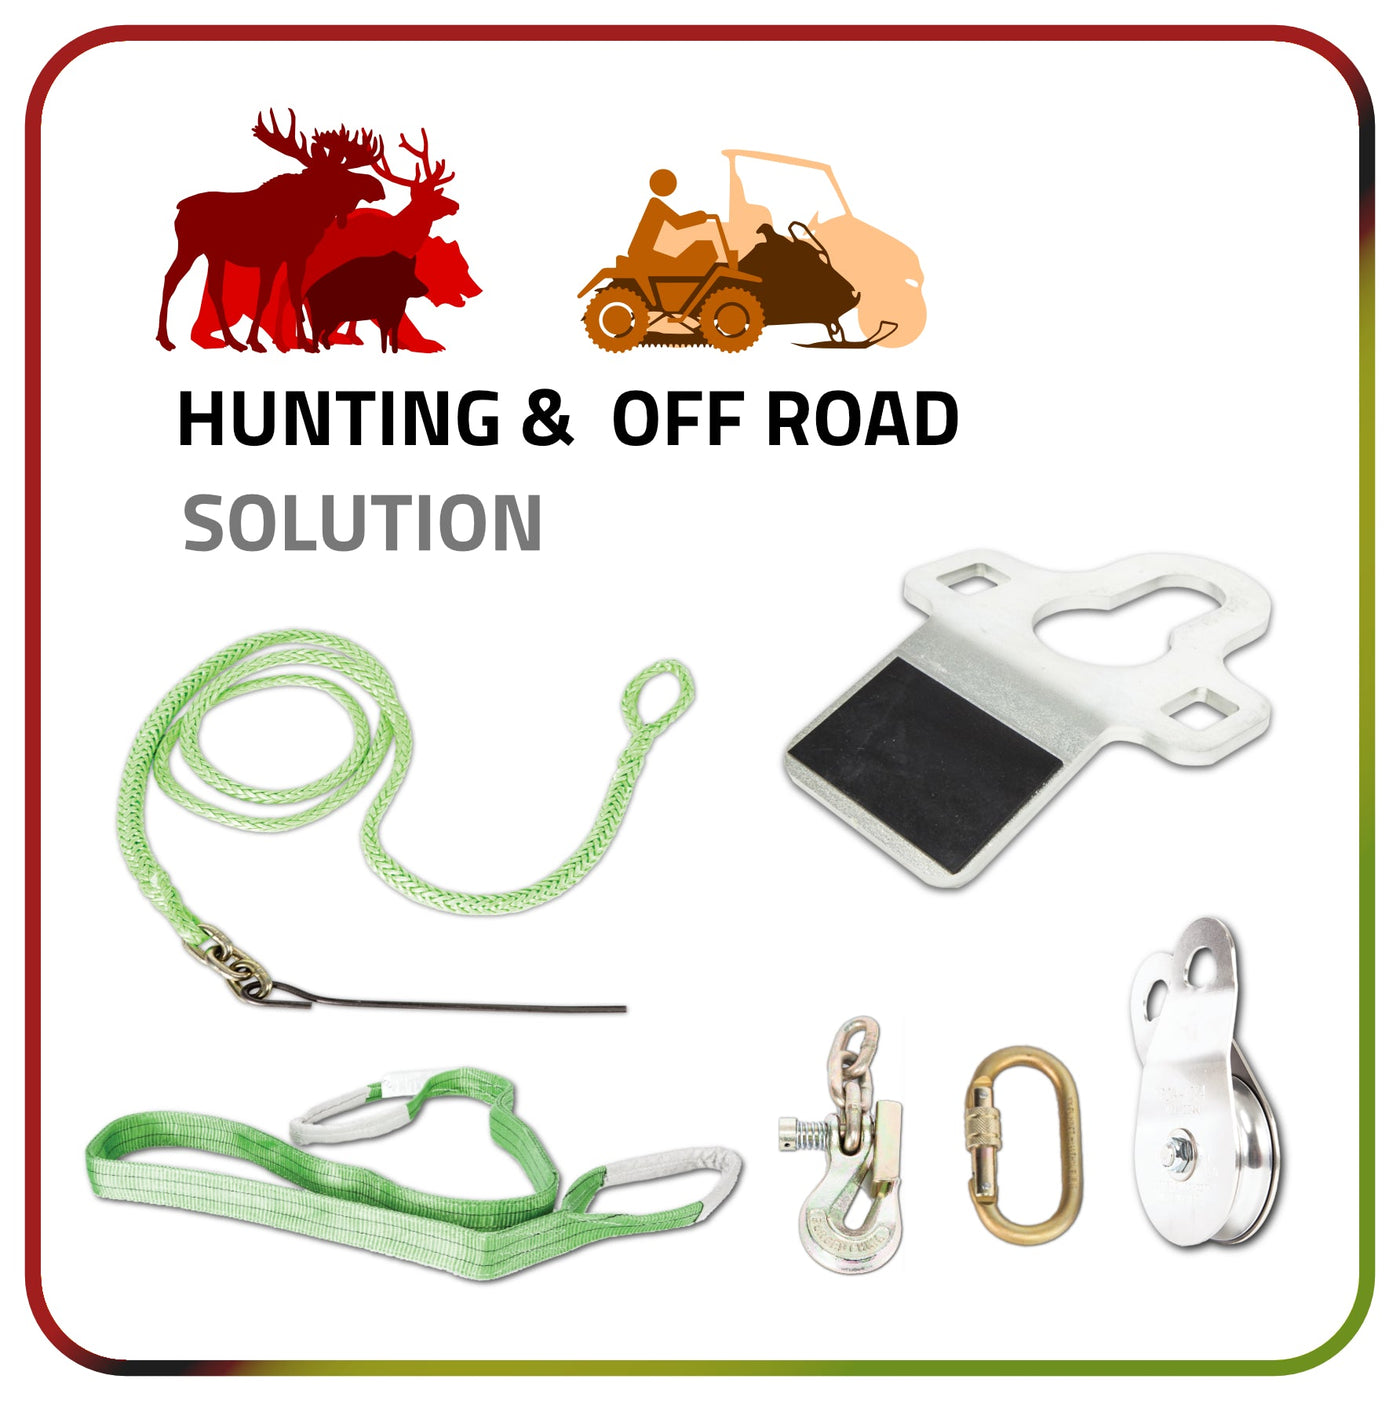 The Hunting & Off-Roading Solution